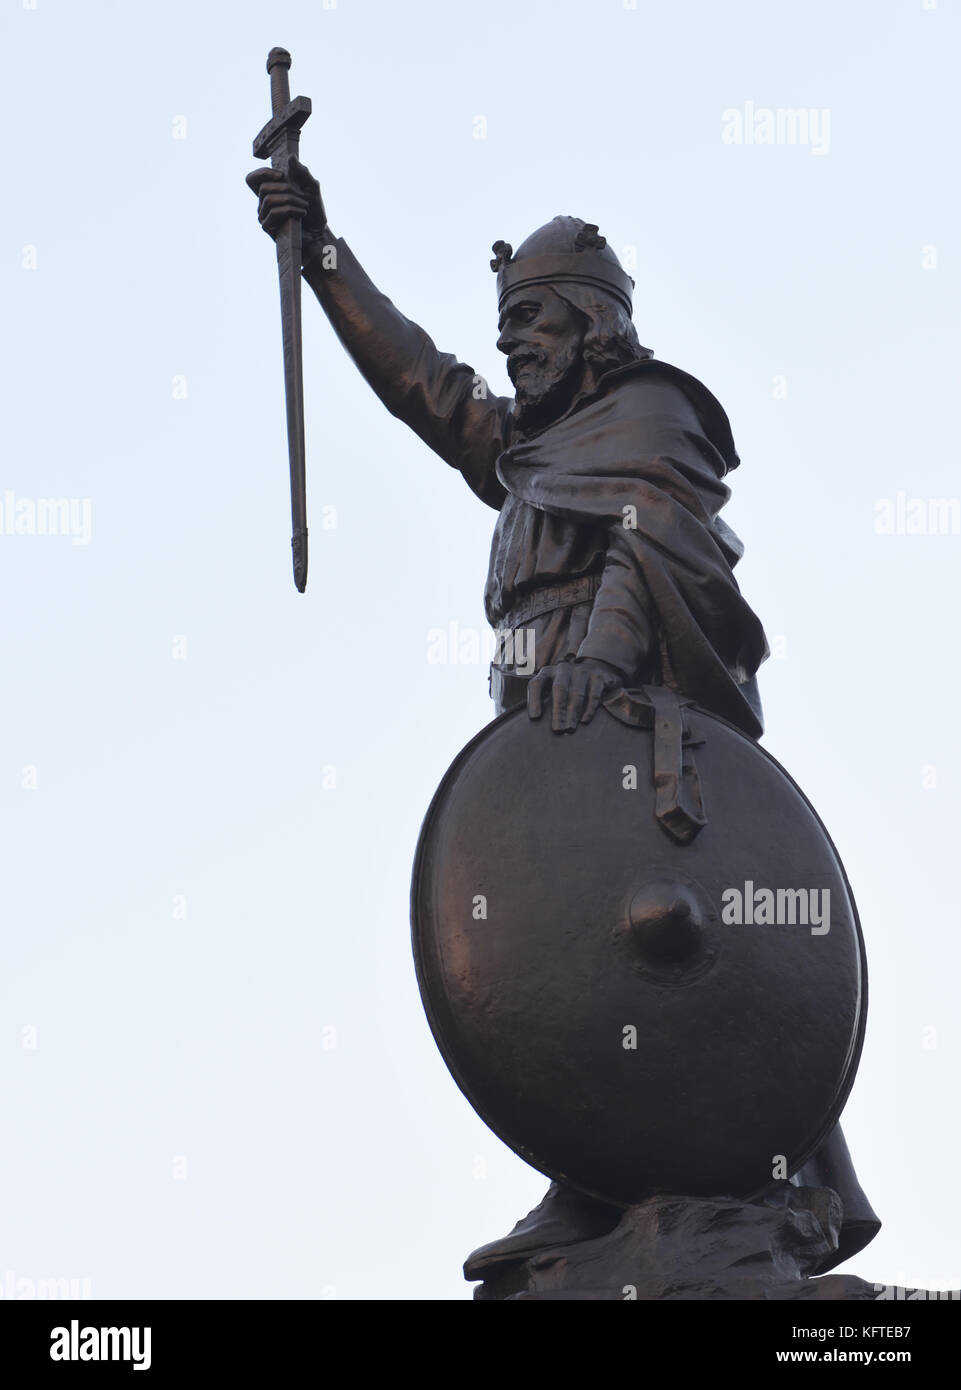 Bronze statue of King Alfred the Great, king of Wessex, in Winchester, his onetime capital. Winchester, Hampshire, UK. Stock Photo